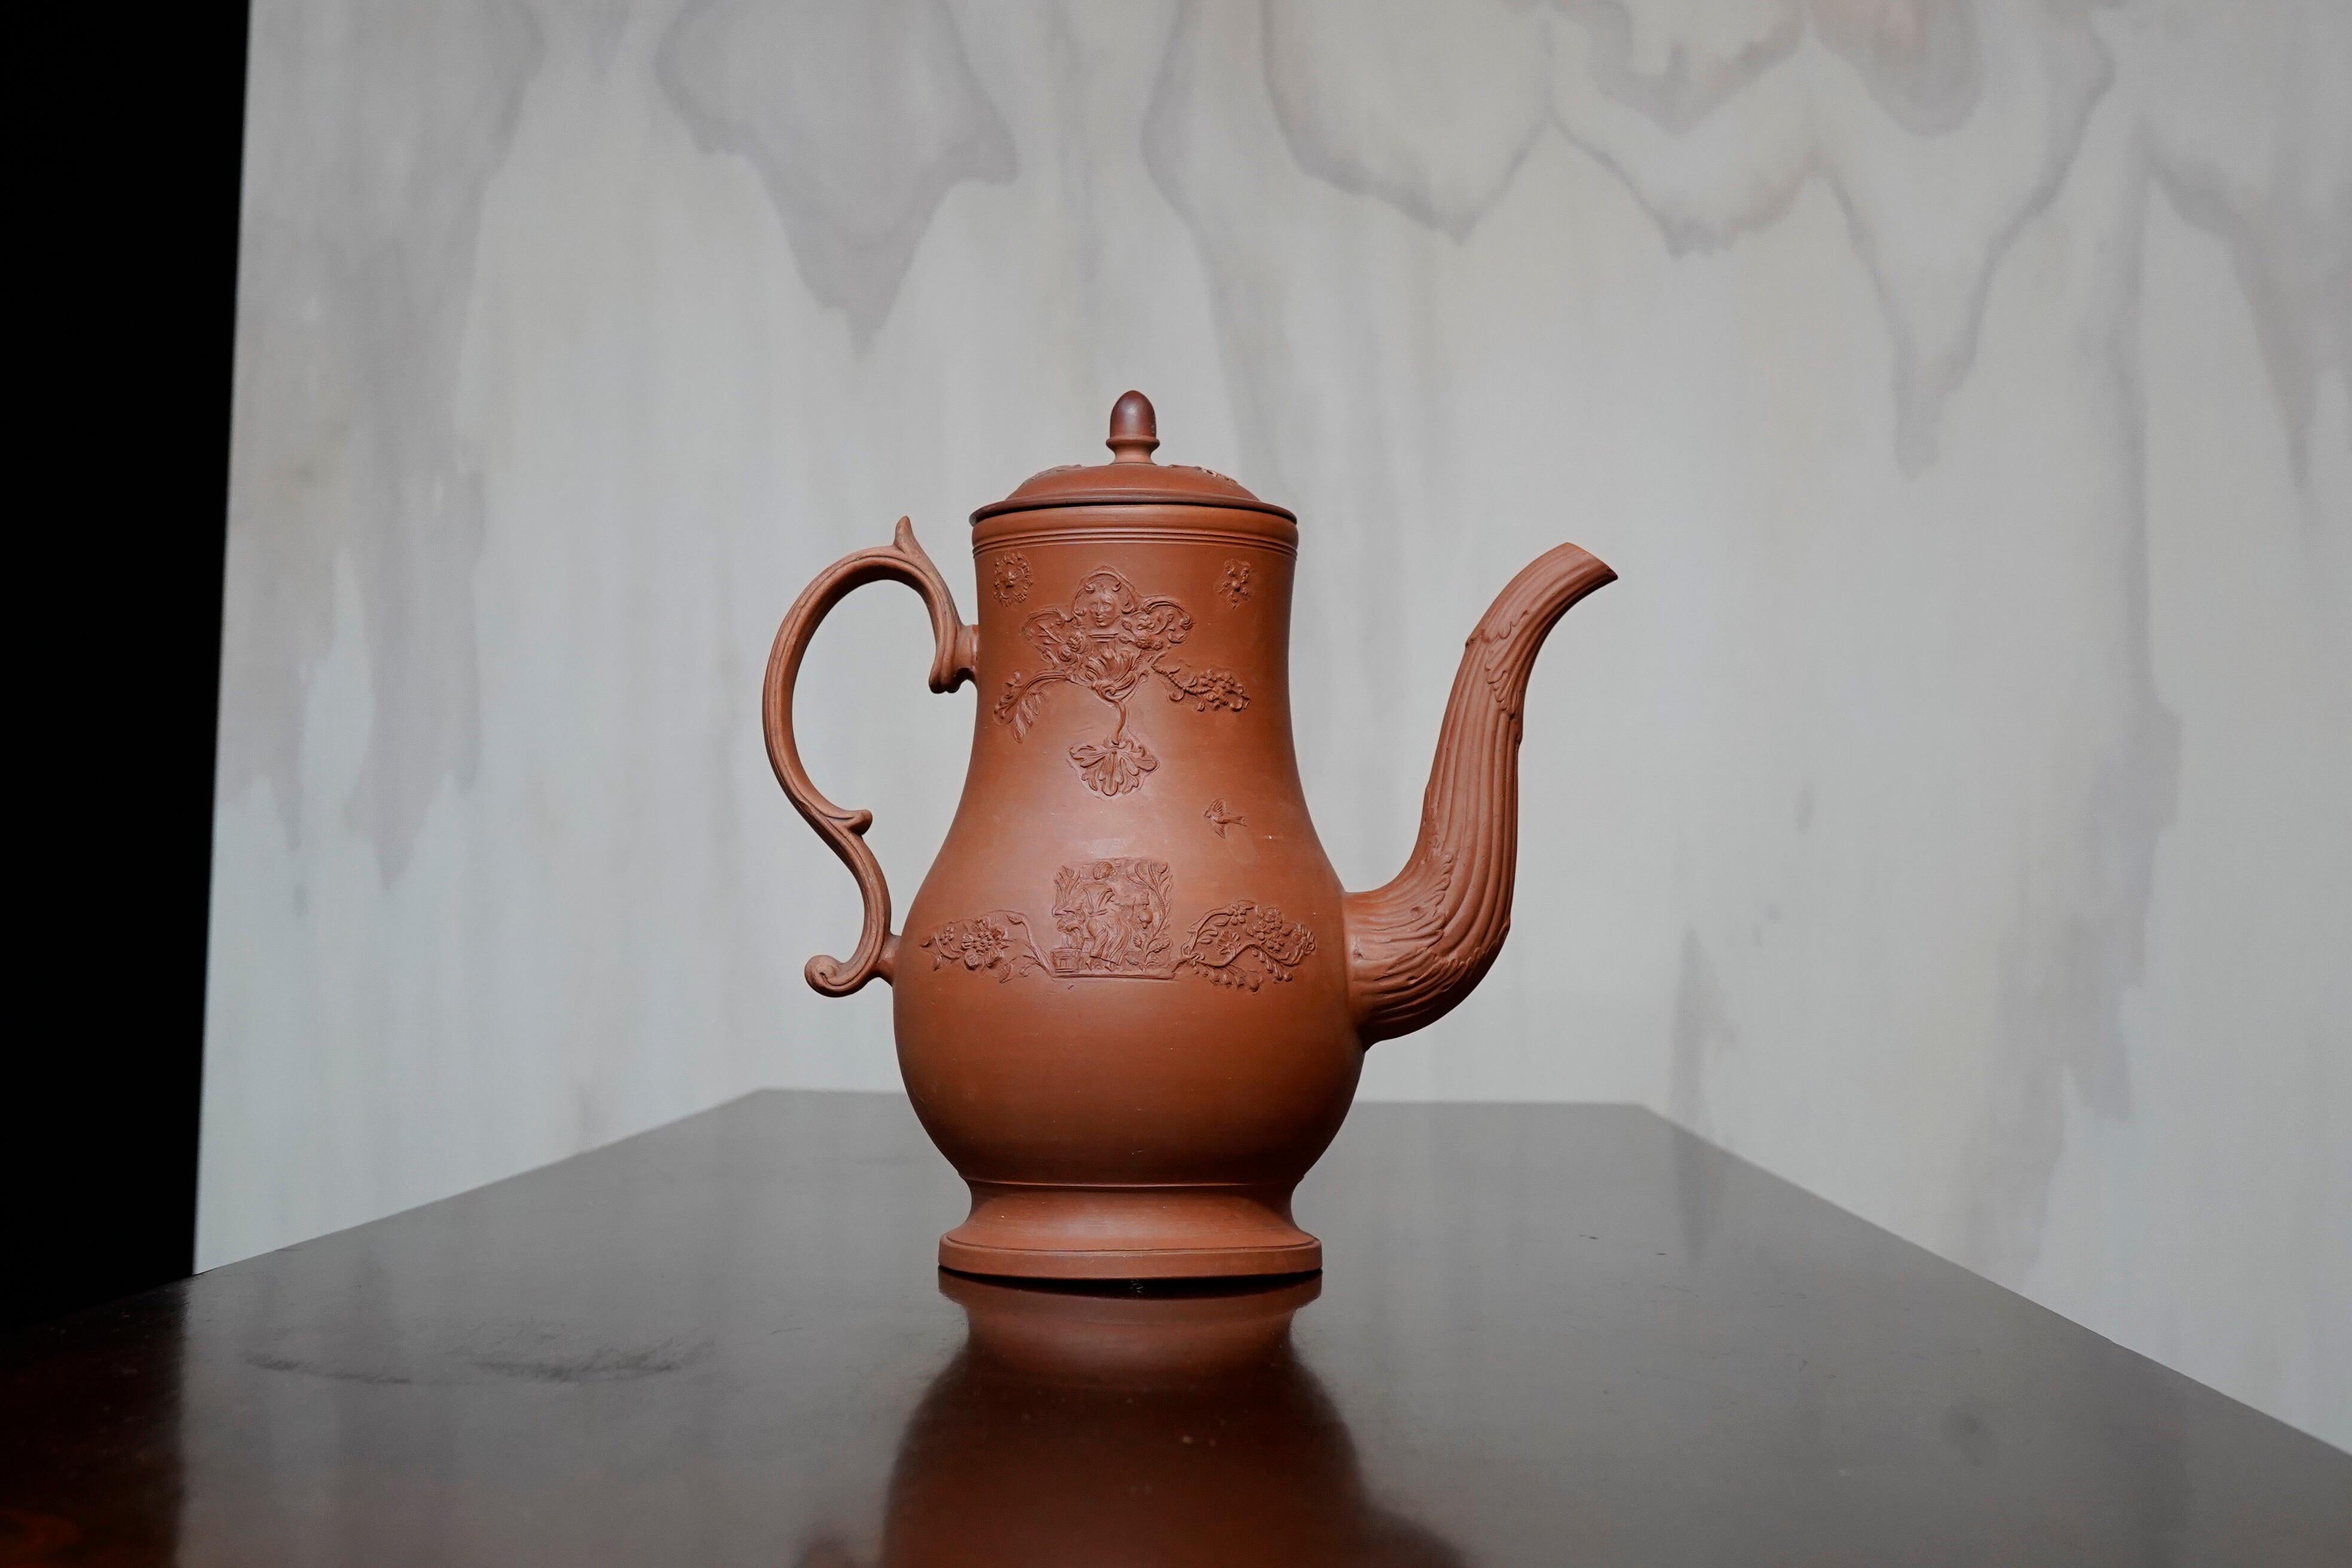 Redware coffee pot, with Rococo sprigging including a ‘man-in-the-moon’, acanthus leaf moulded spout, and distinct Rococo handle with basketweave.

Unmarked, attributed to Leeds,

circa 1765

The features of this vessel give clues to its